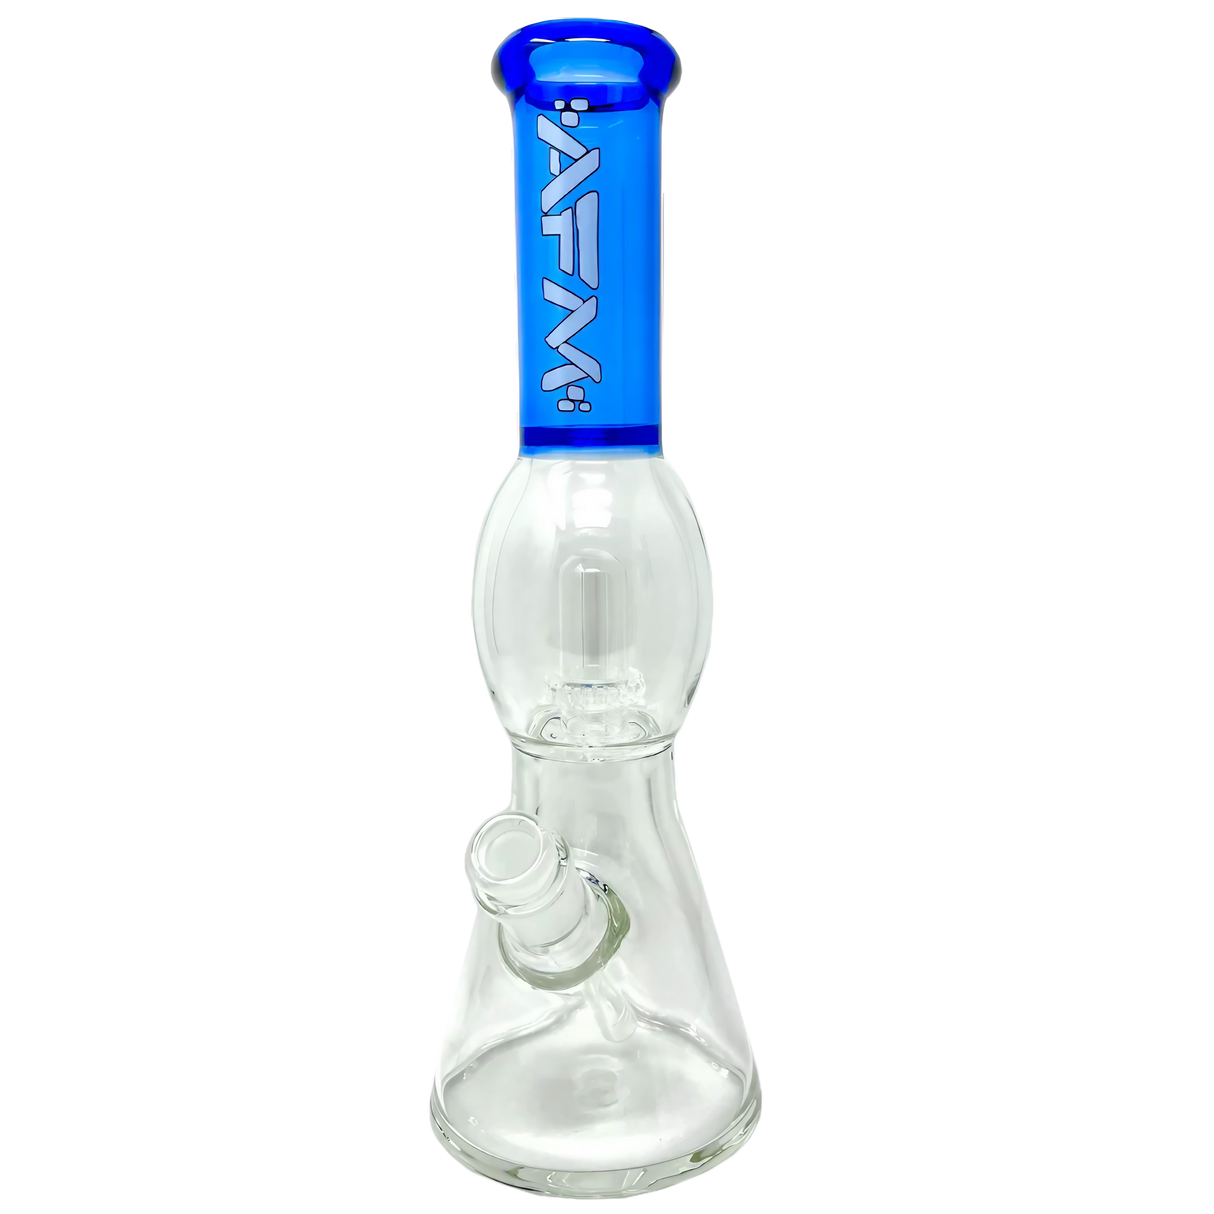 AFM The Ufo 12" Dab Rig with Blue Percolator - Front View on Seamless White